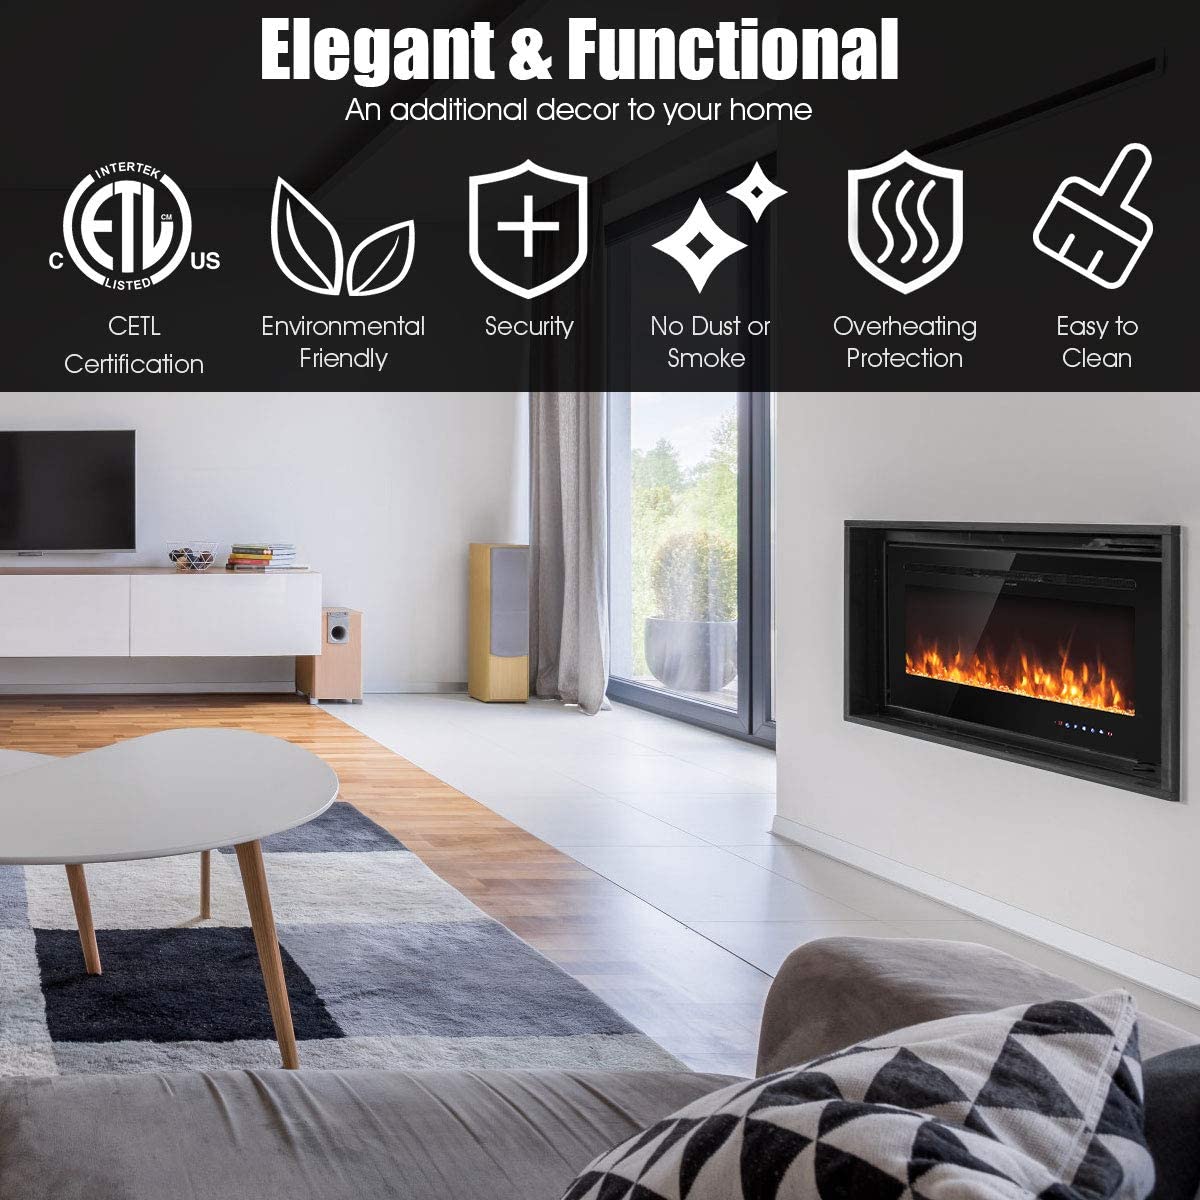 Chairliving 36 Inch Electric Wall Mounted Ultrathin Fireplace 1500W Faux Heater with LED Screen and Remote Control